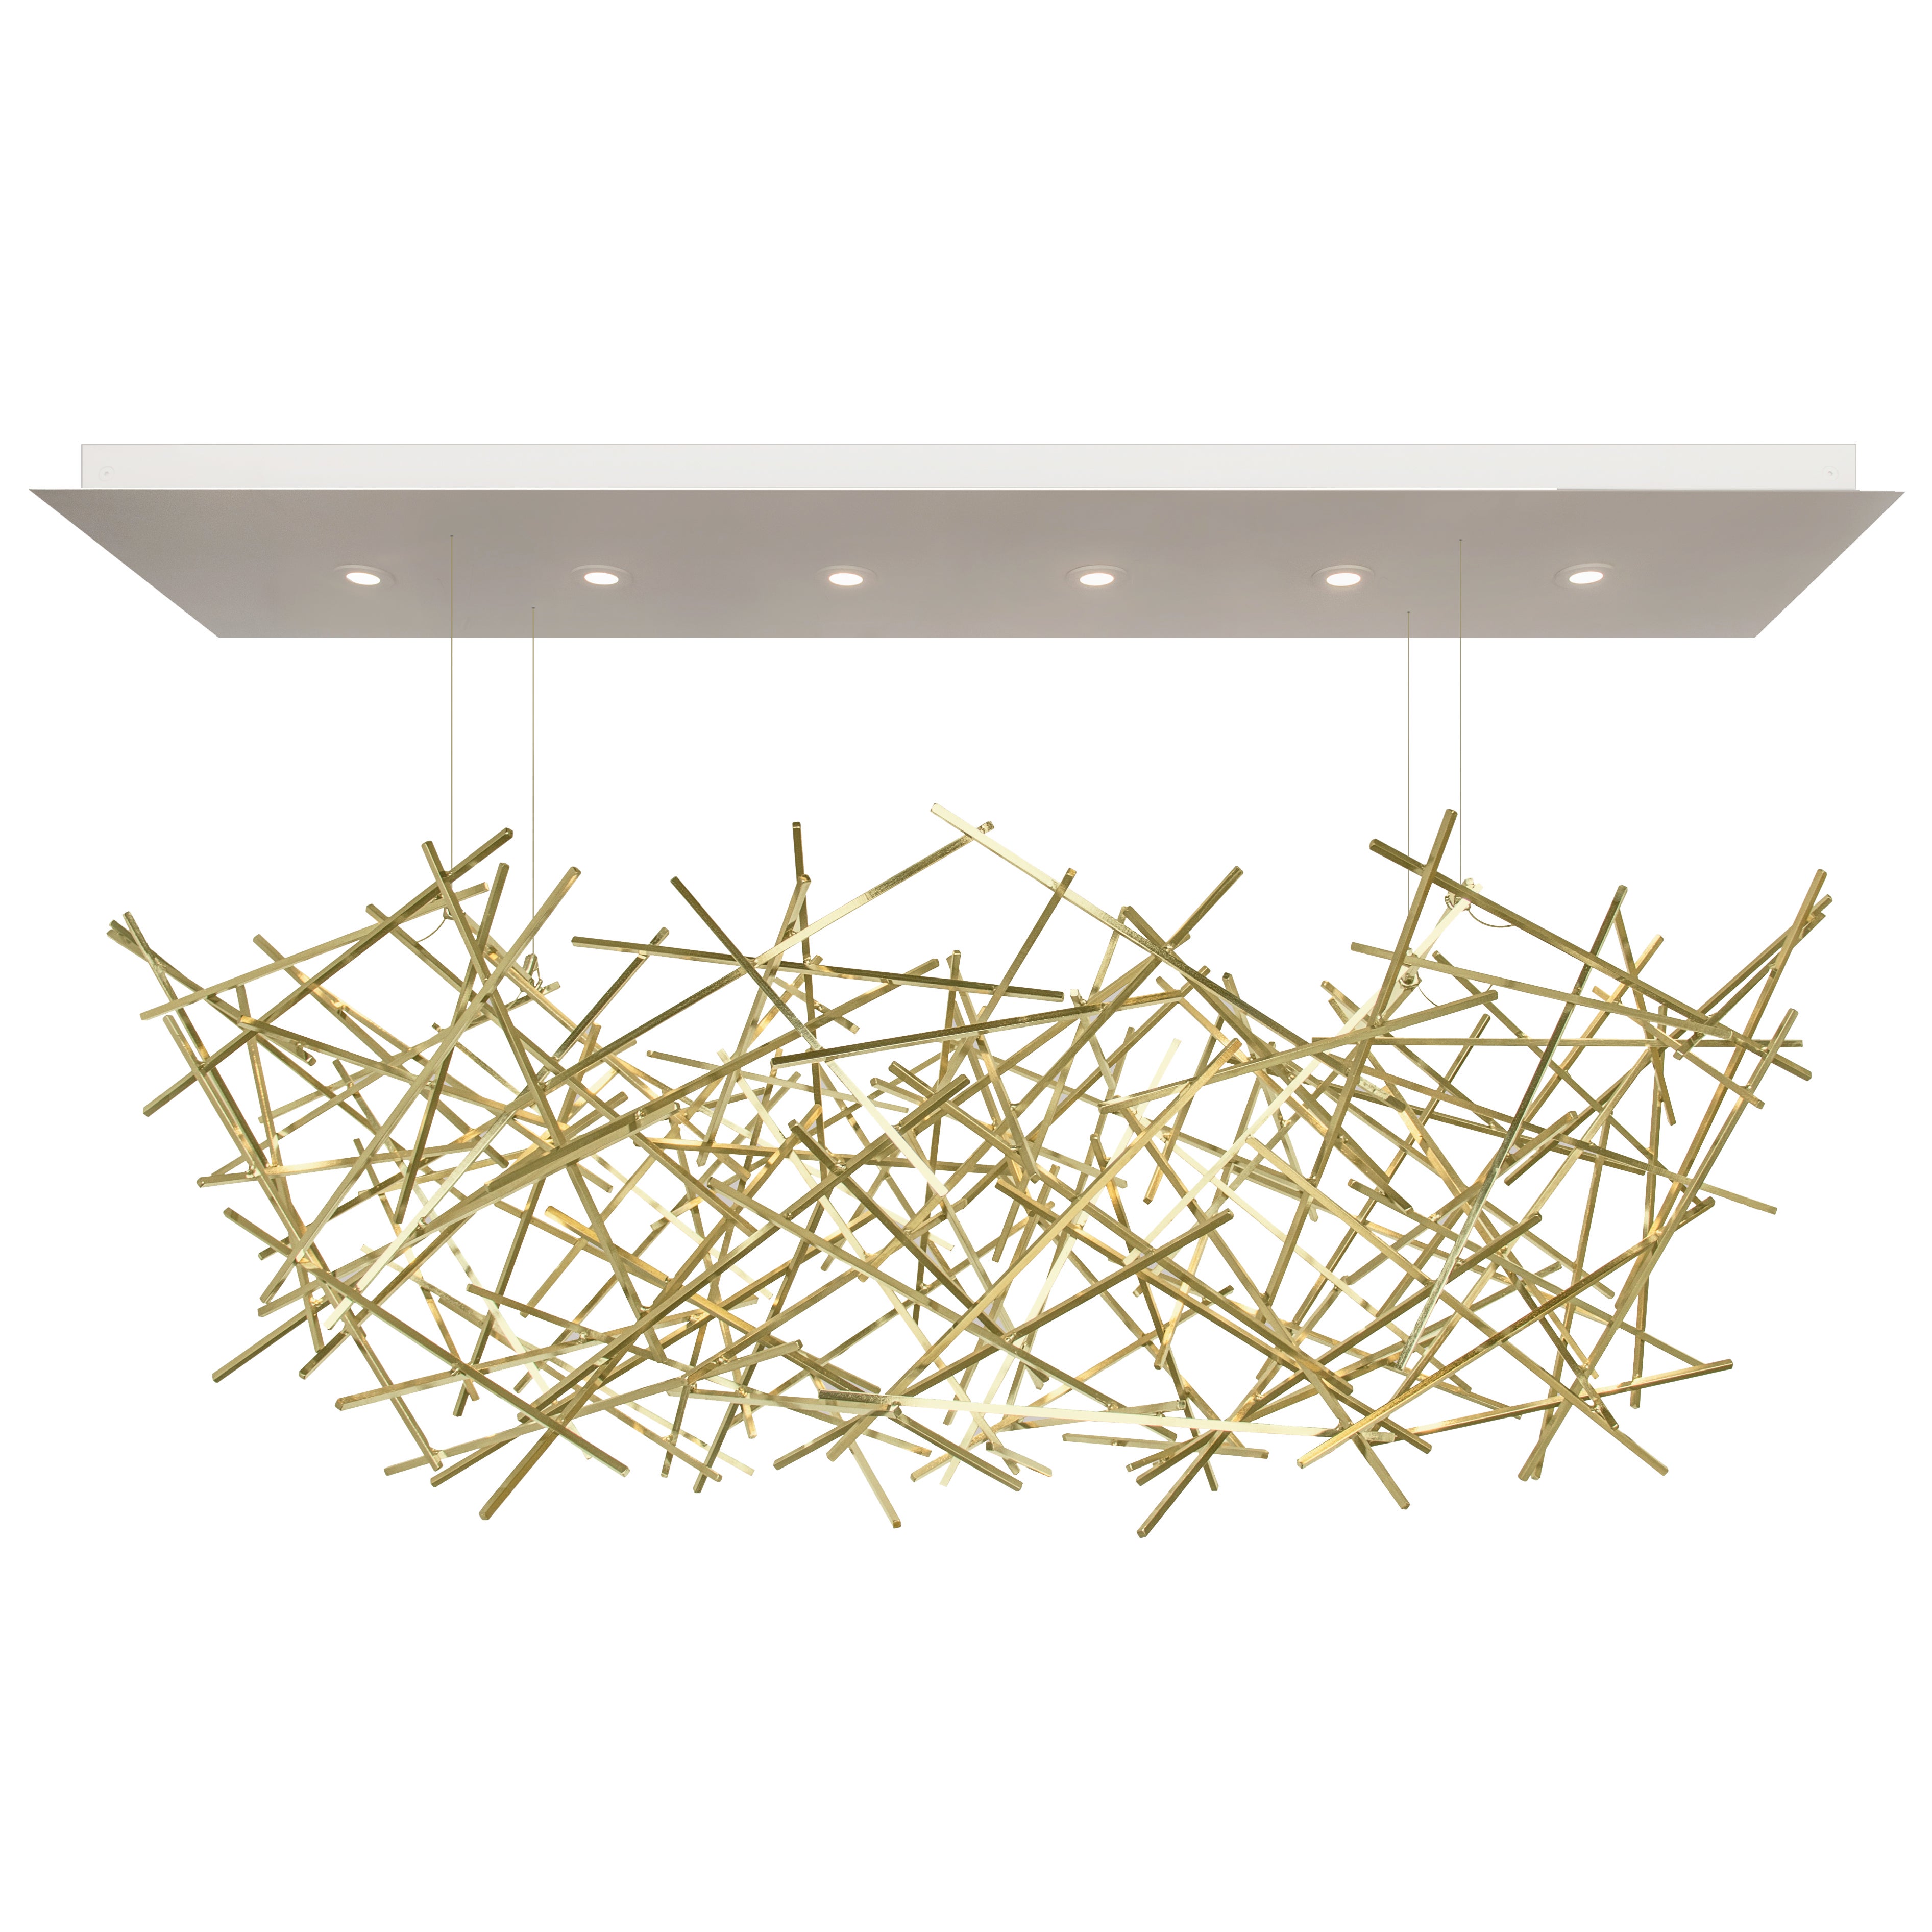 Contemporary Criss Cross Chandelier, Satin Brass 60 Inch For Sale